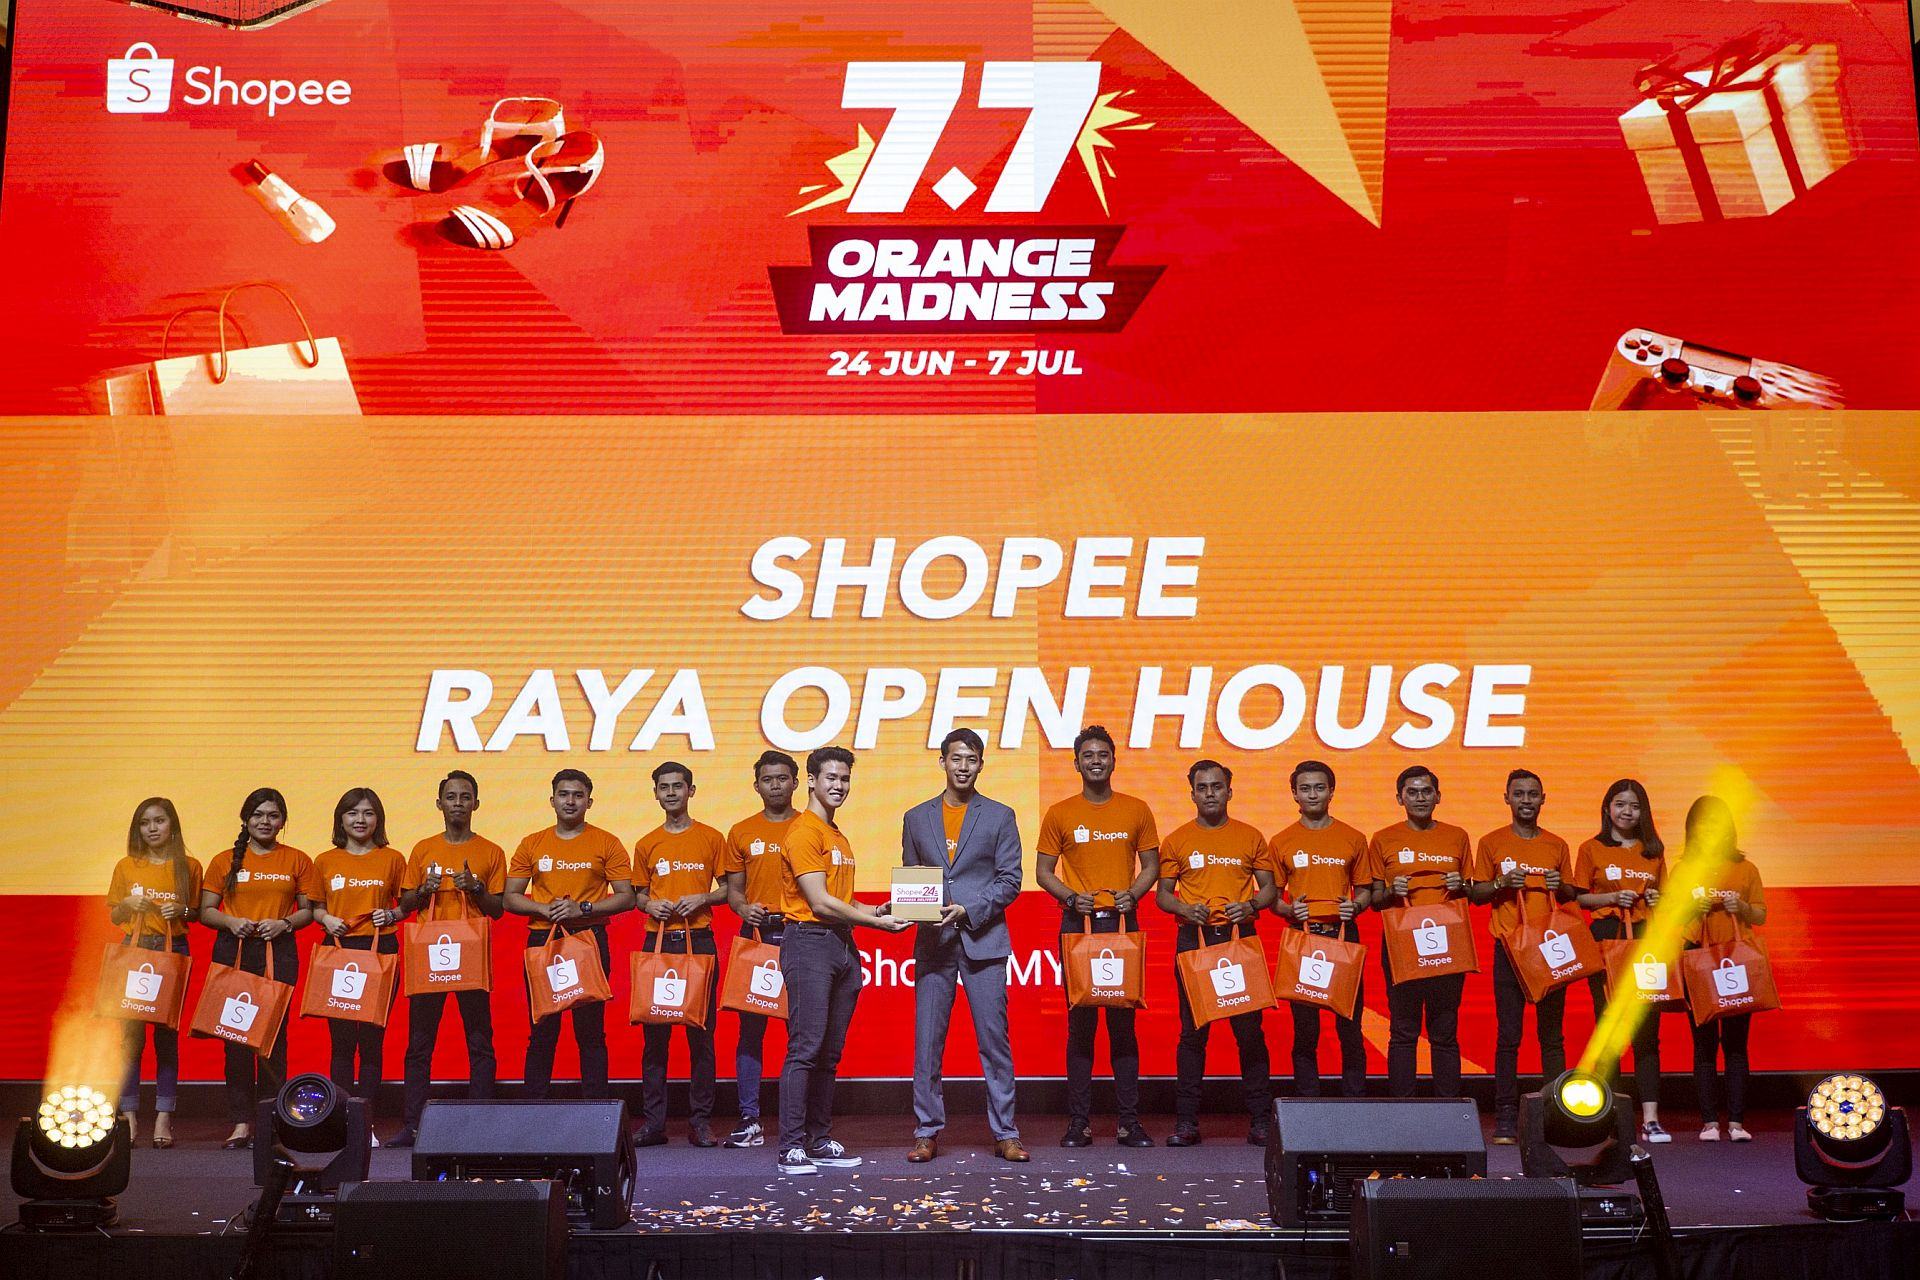 Shopee Launches Shopee24 Express Delivery Service That Guarantees Next-Day Delivery